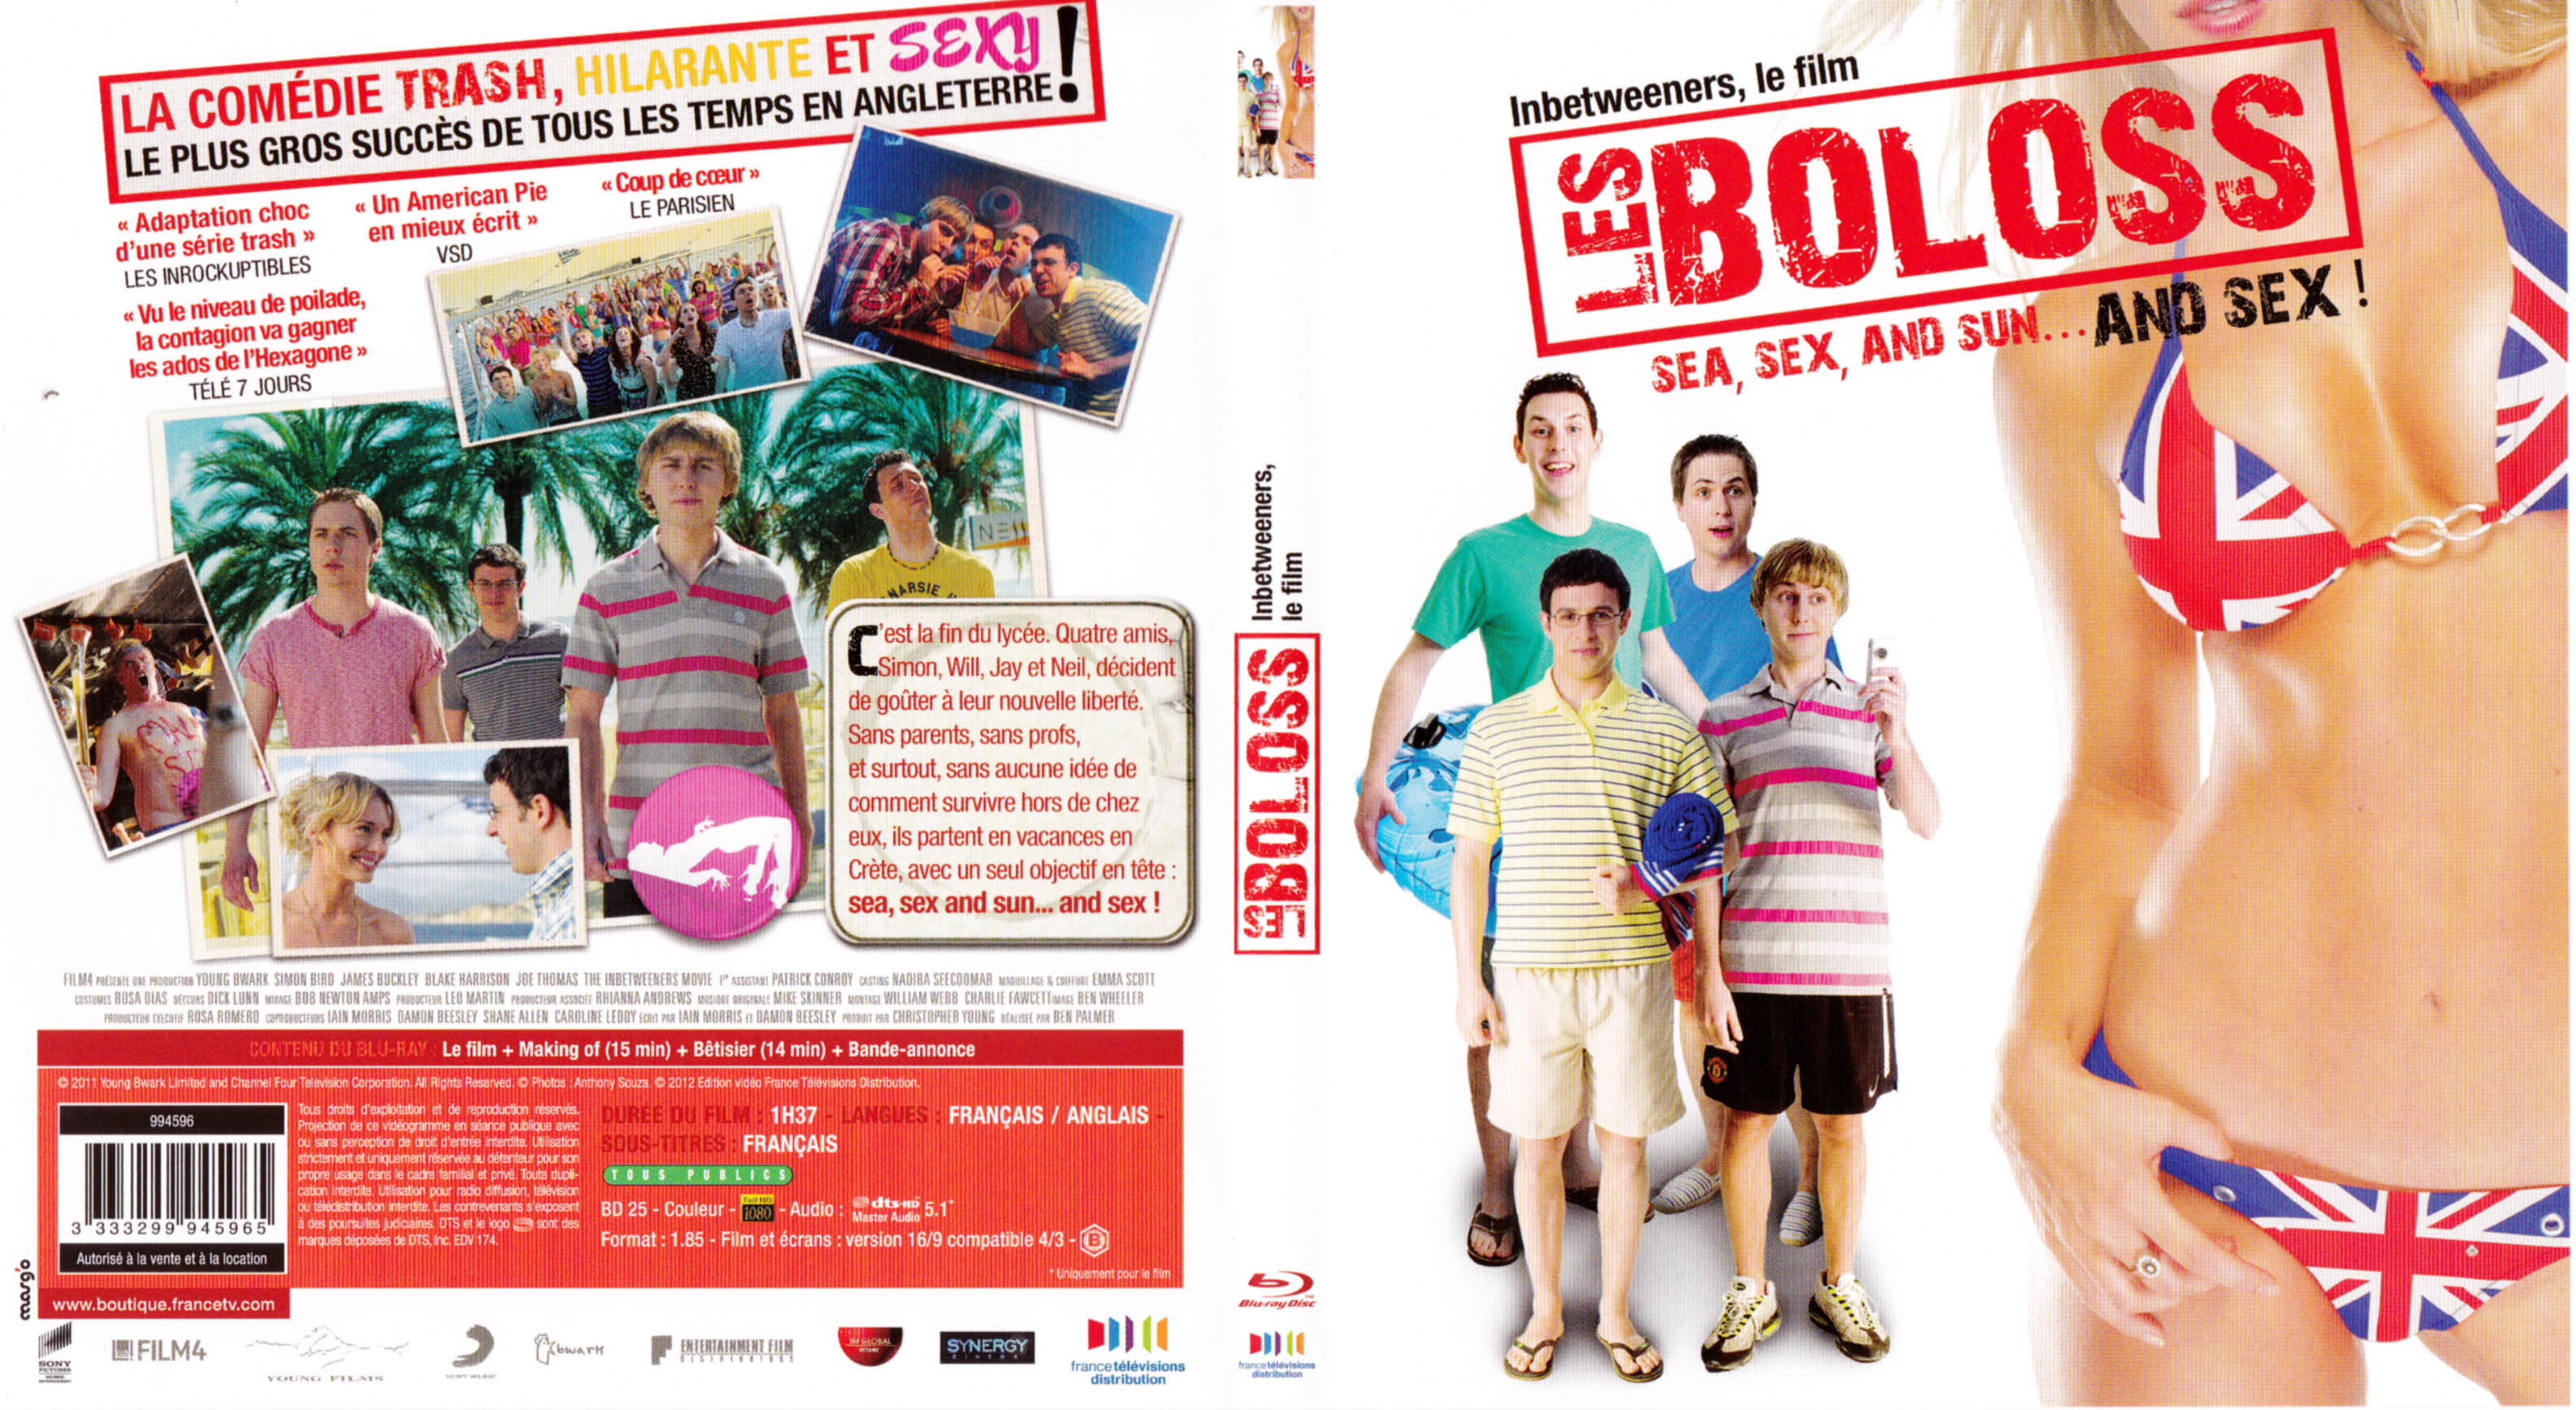 Jaquette DVD Les Boloss (BLU-RAY)